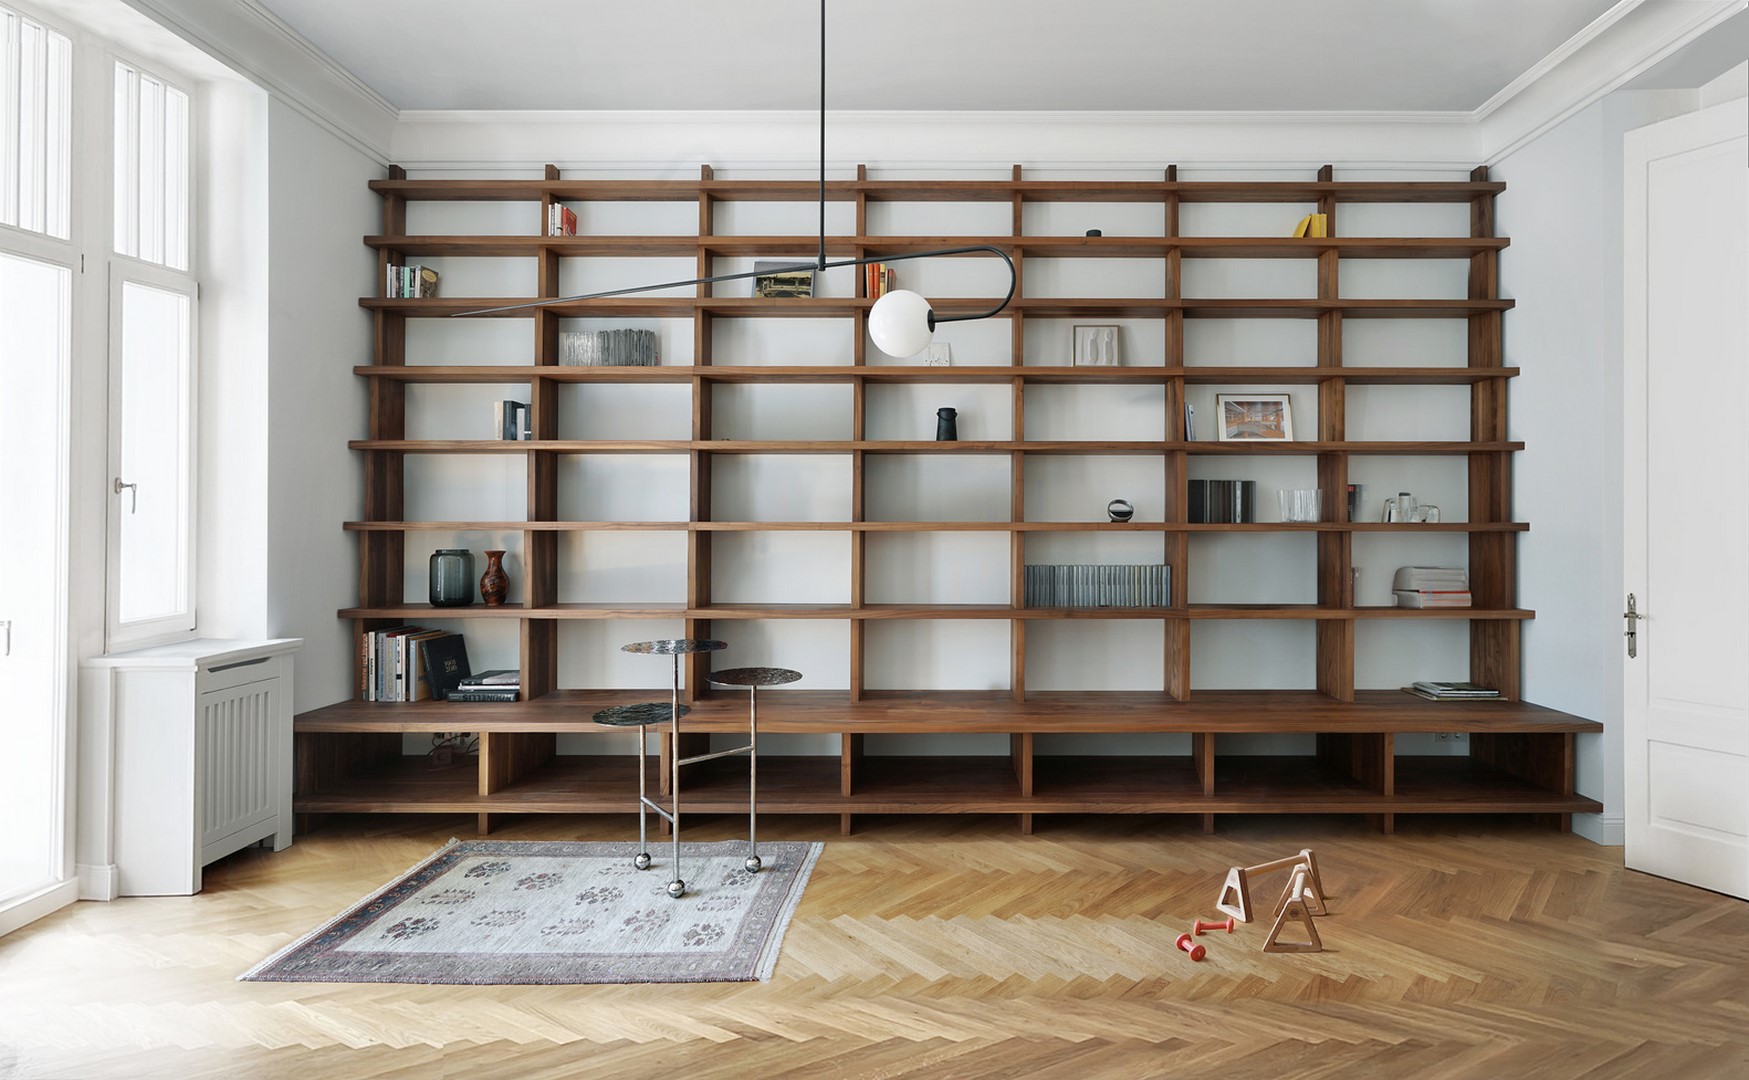 Redefining Space: The MOMM Apartment Transformation